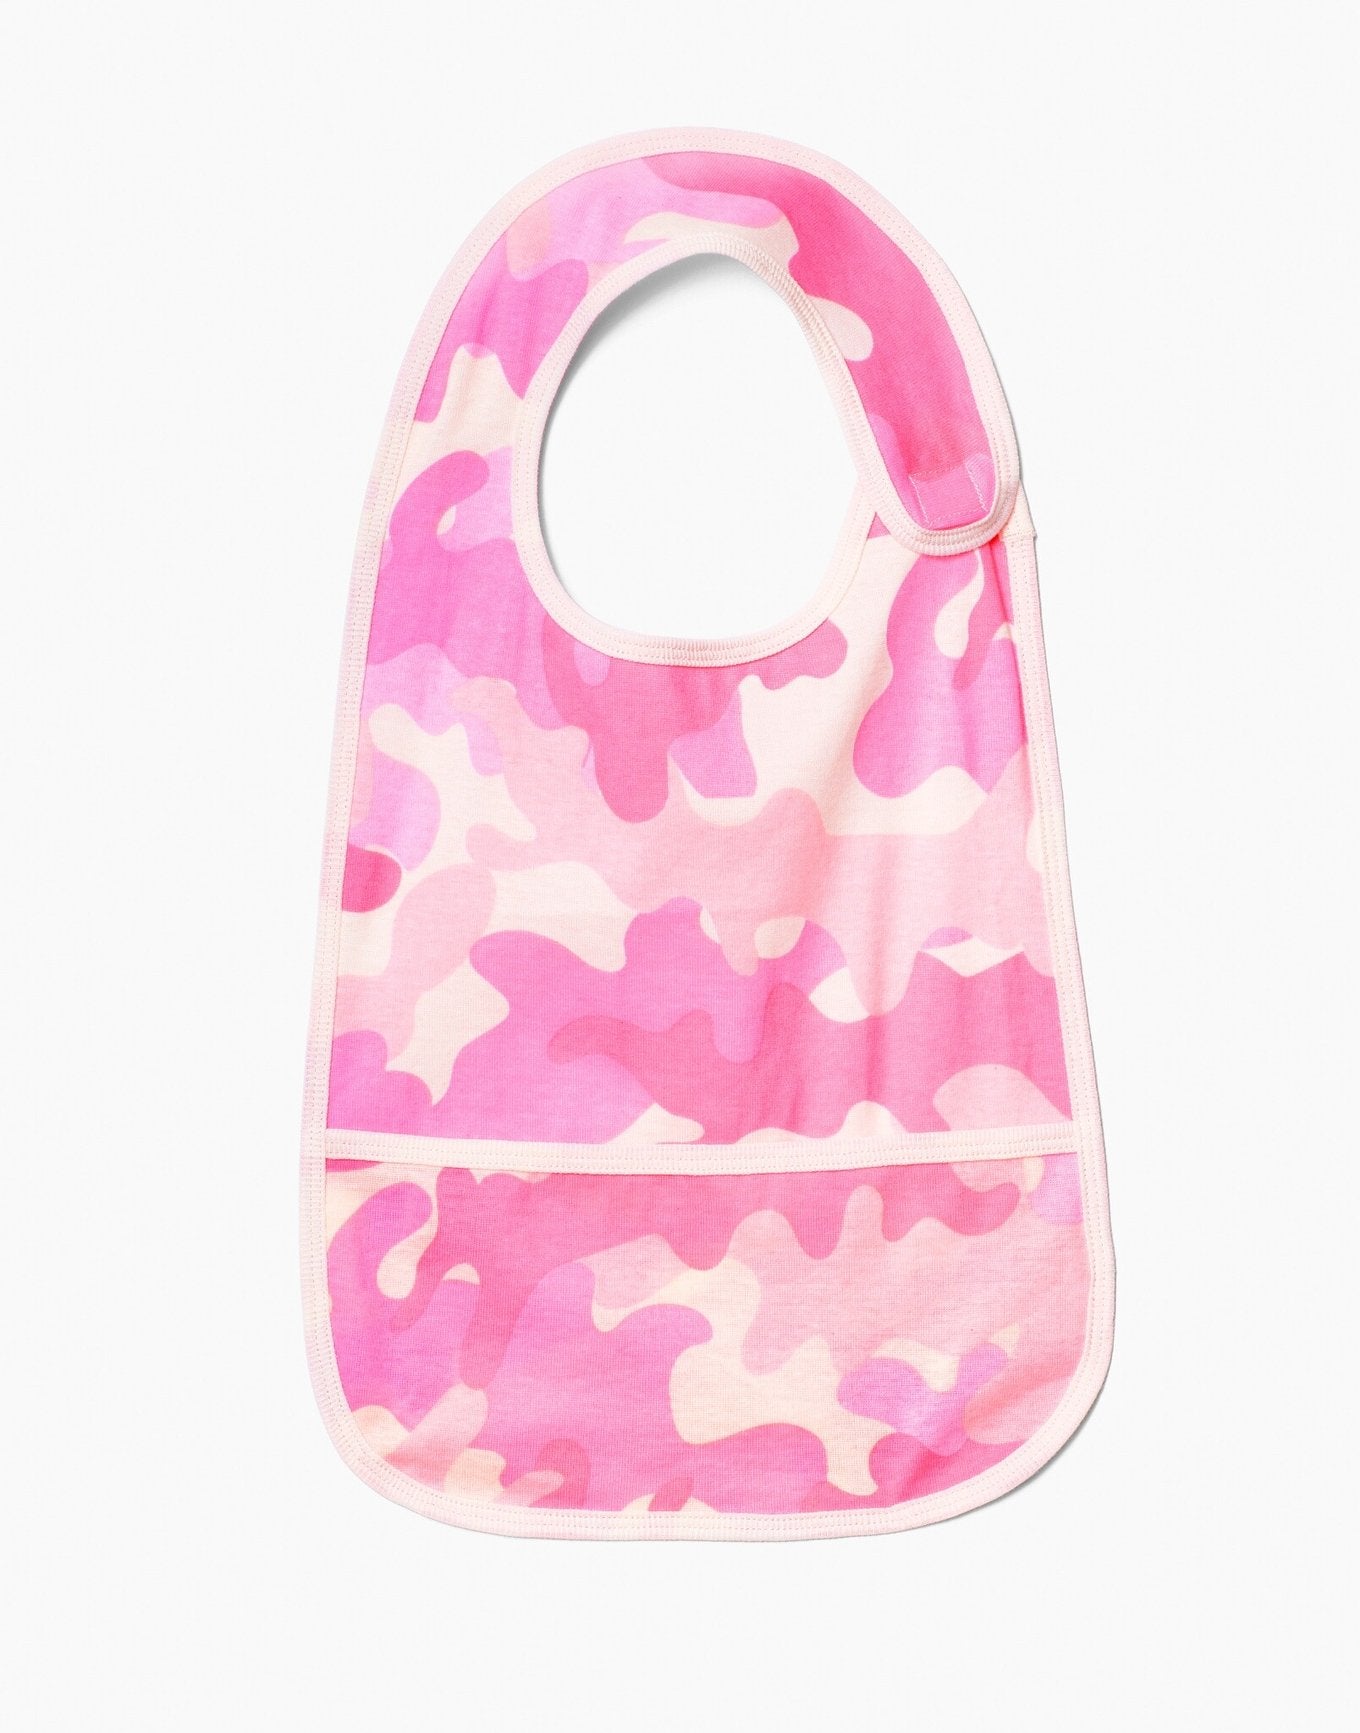 Outlines Kids Lennon in color Pink Camo and shape bib & bandana